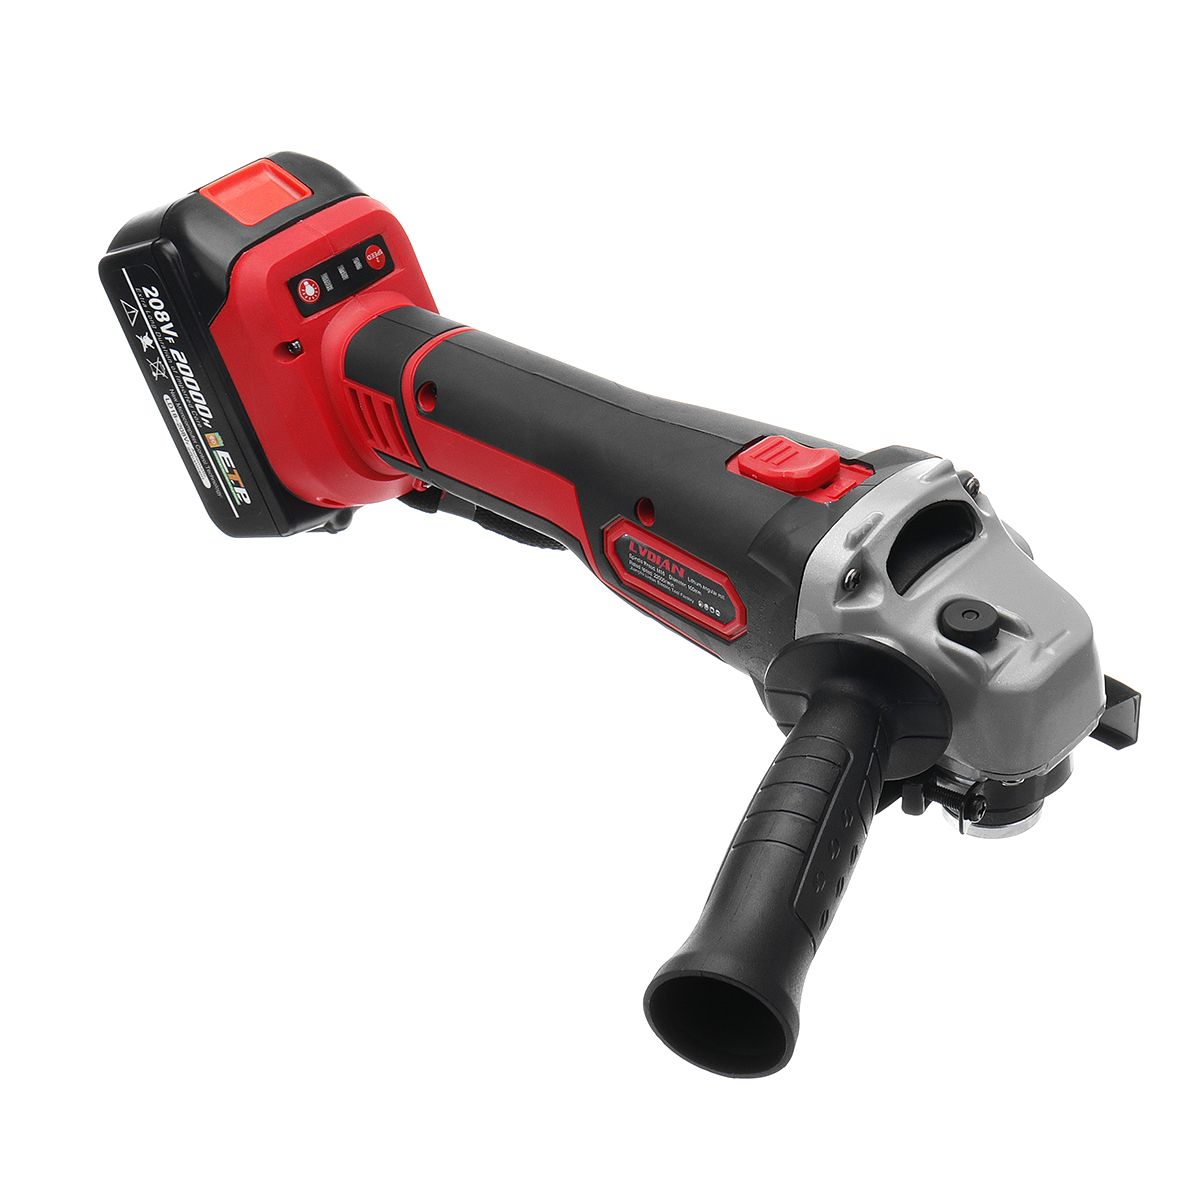 110-220V-22000rpm-Cordless-Electric-Angle-Grinder-Power-Cutting-Tool-with--Auxiliary-Handle-Charger--1711682